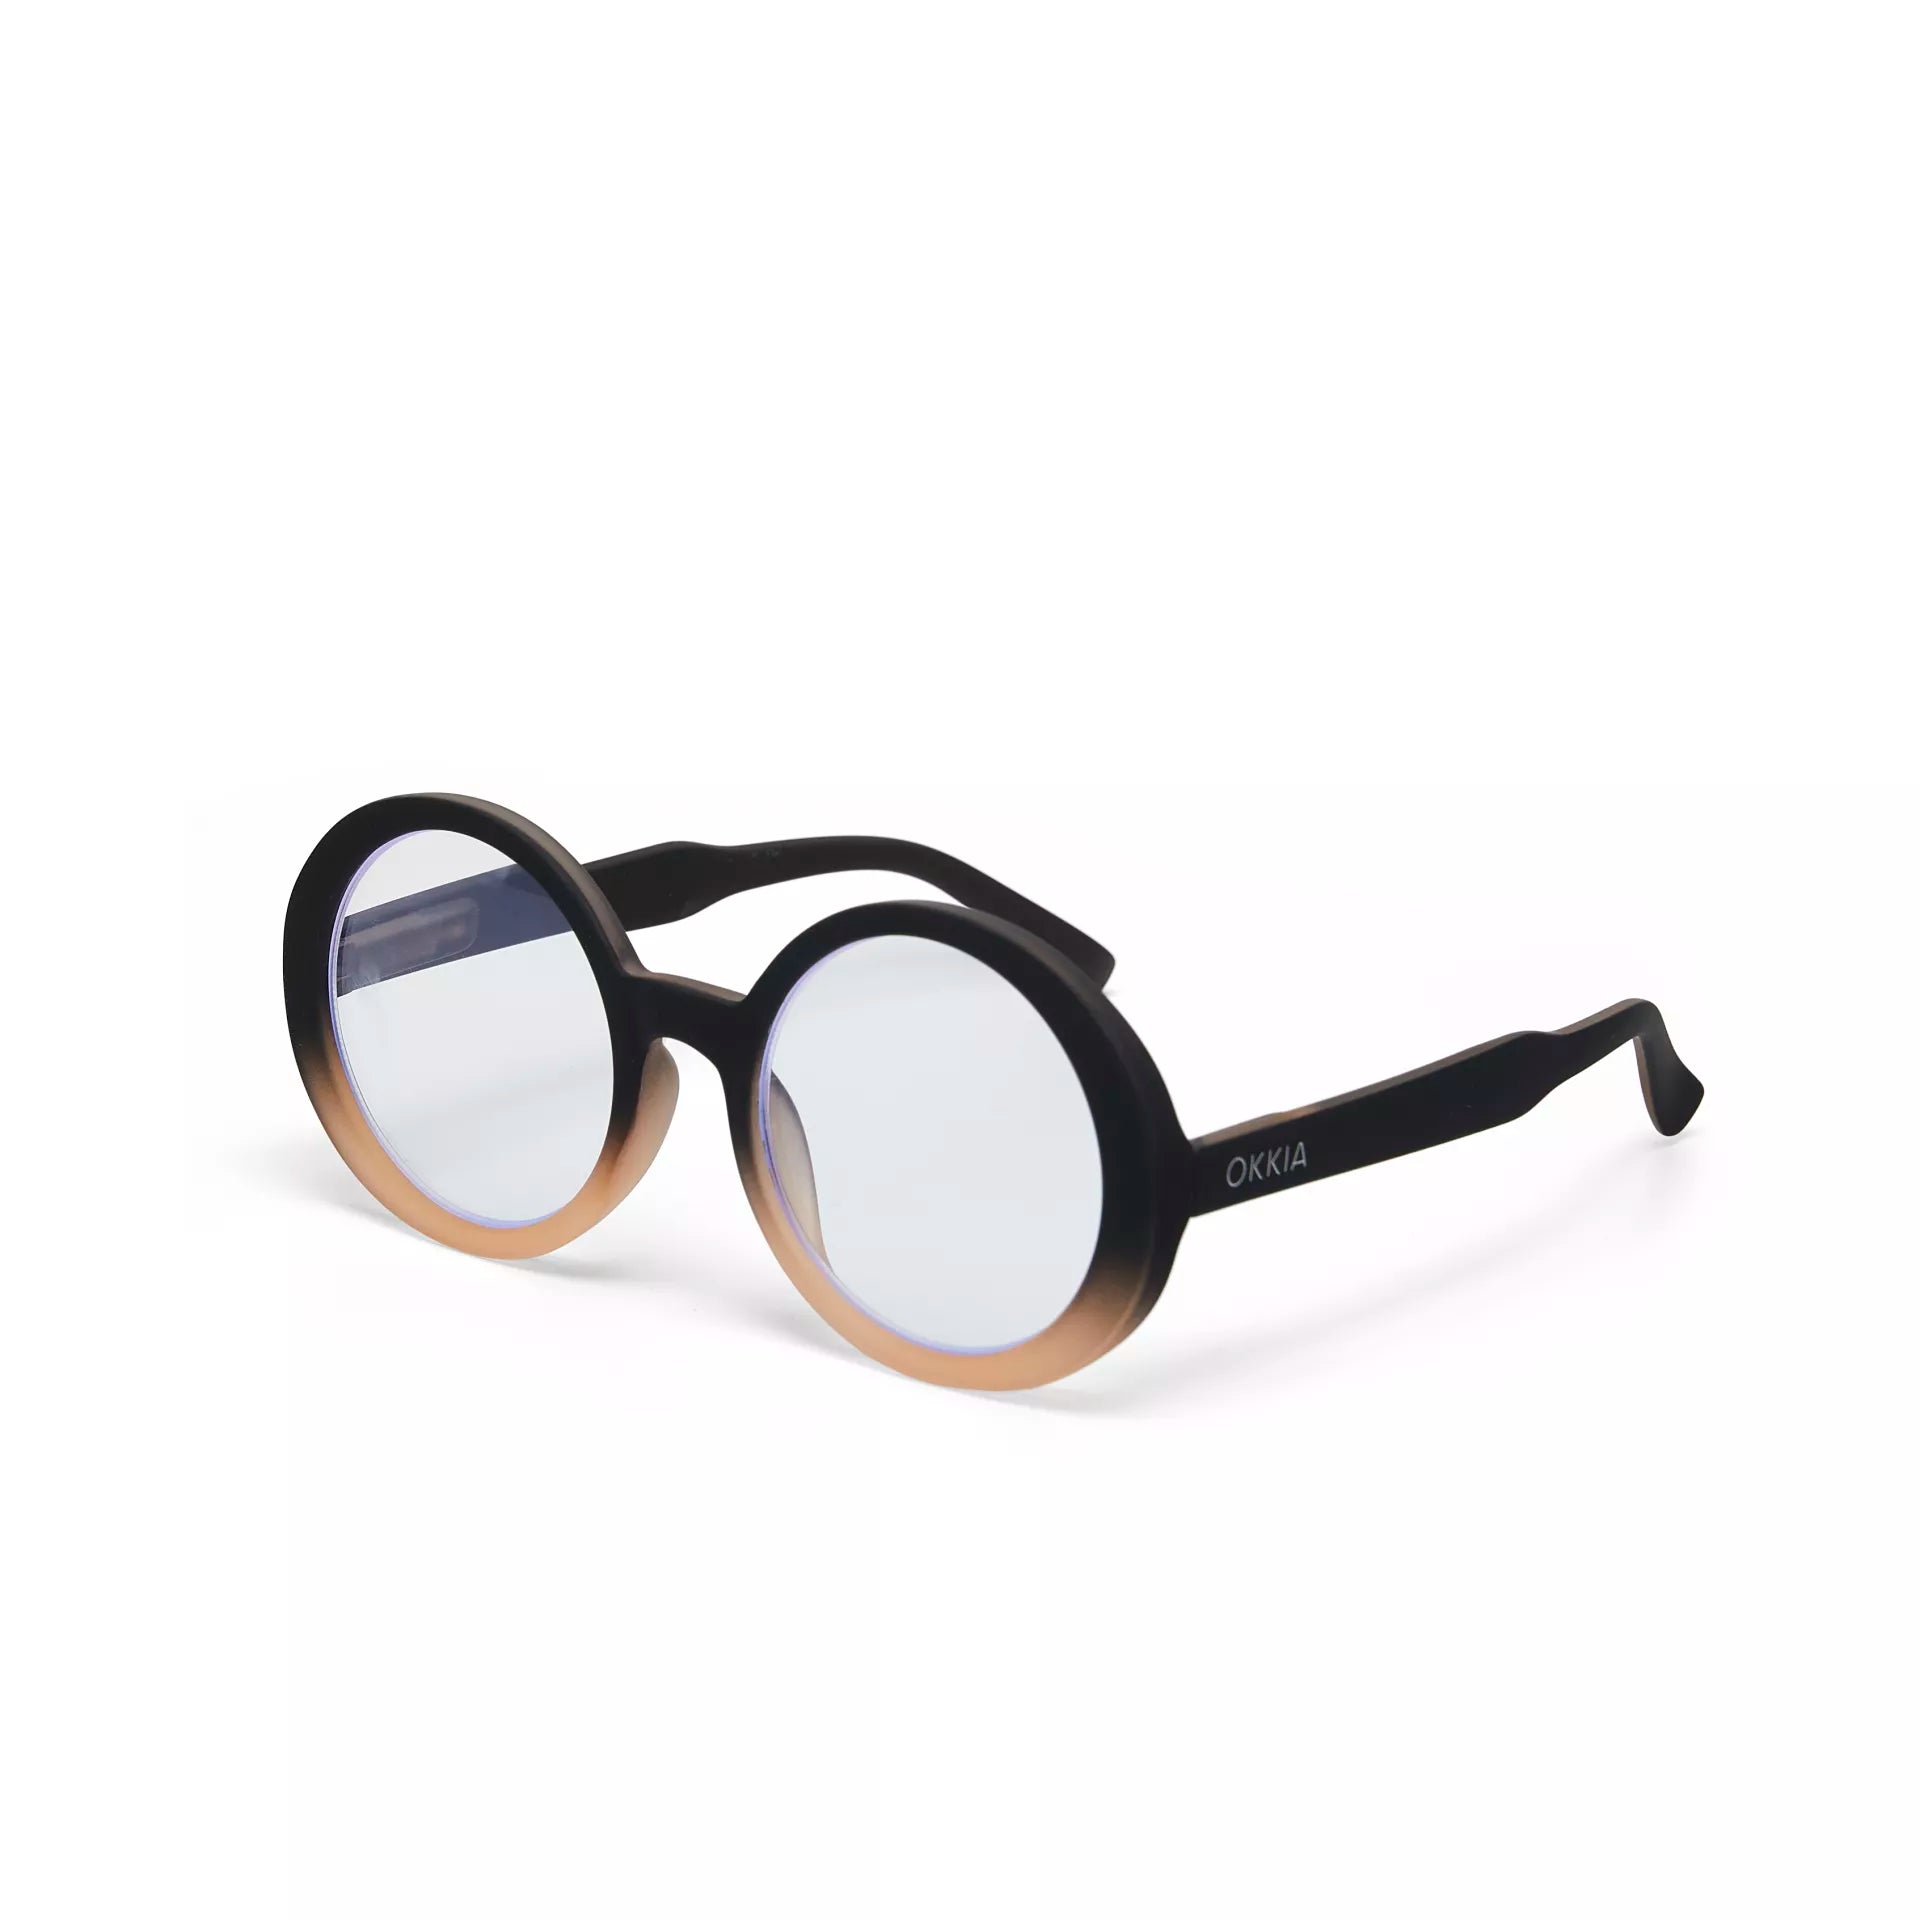 Fabulous Gifts Okkia Reading Glasses Tondo Black Rose 1.50 by Weirs of Baggot Street